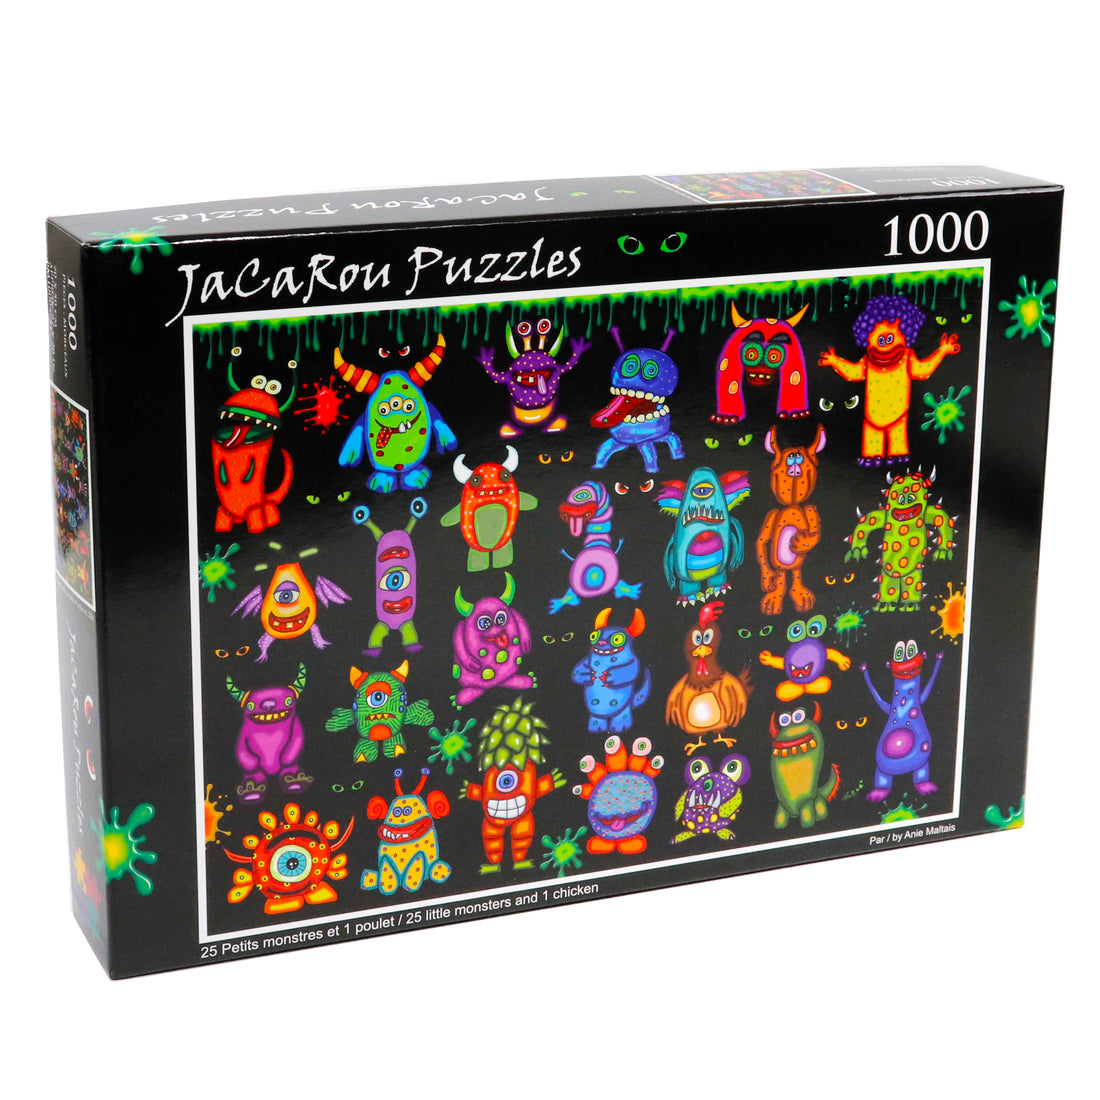 Puzzle - 25 LITTLE MONSTERS AND 1 CHICKEN